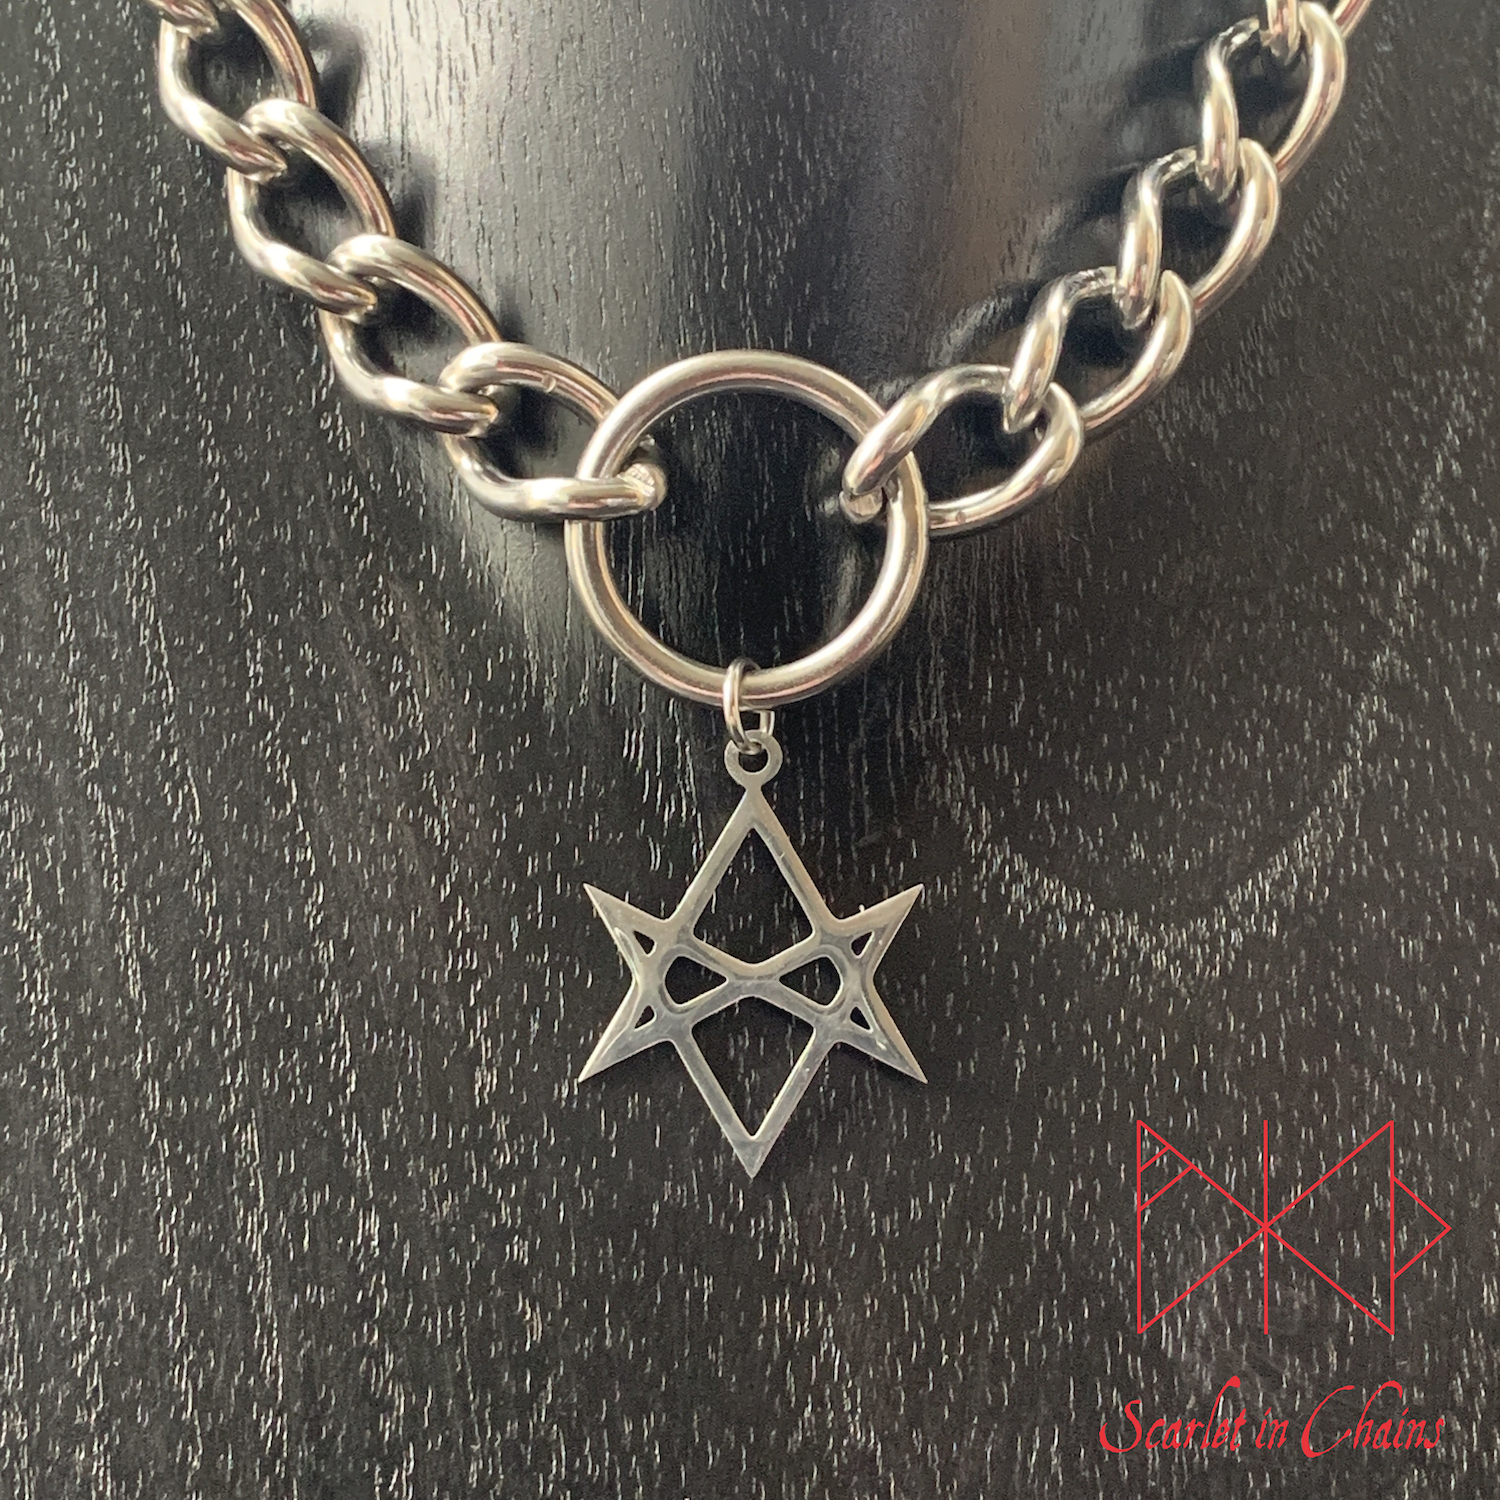 Stainless Steel Unicursal Hexagram charm necklace, day collar, Witch necklace, witchy necklace, Shown close